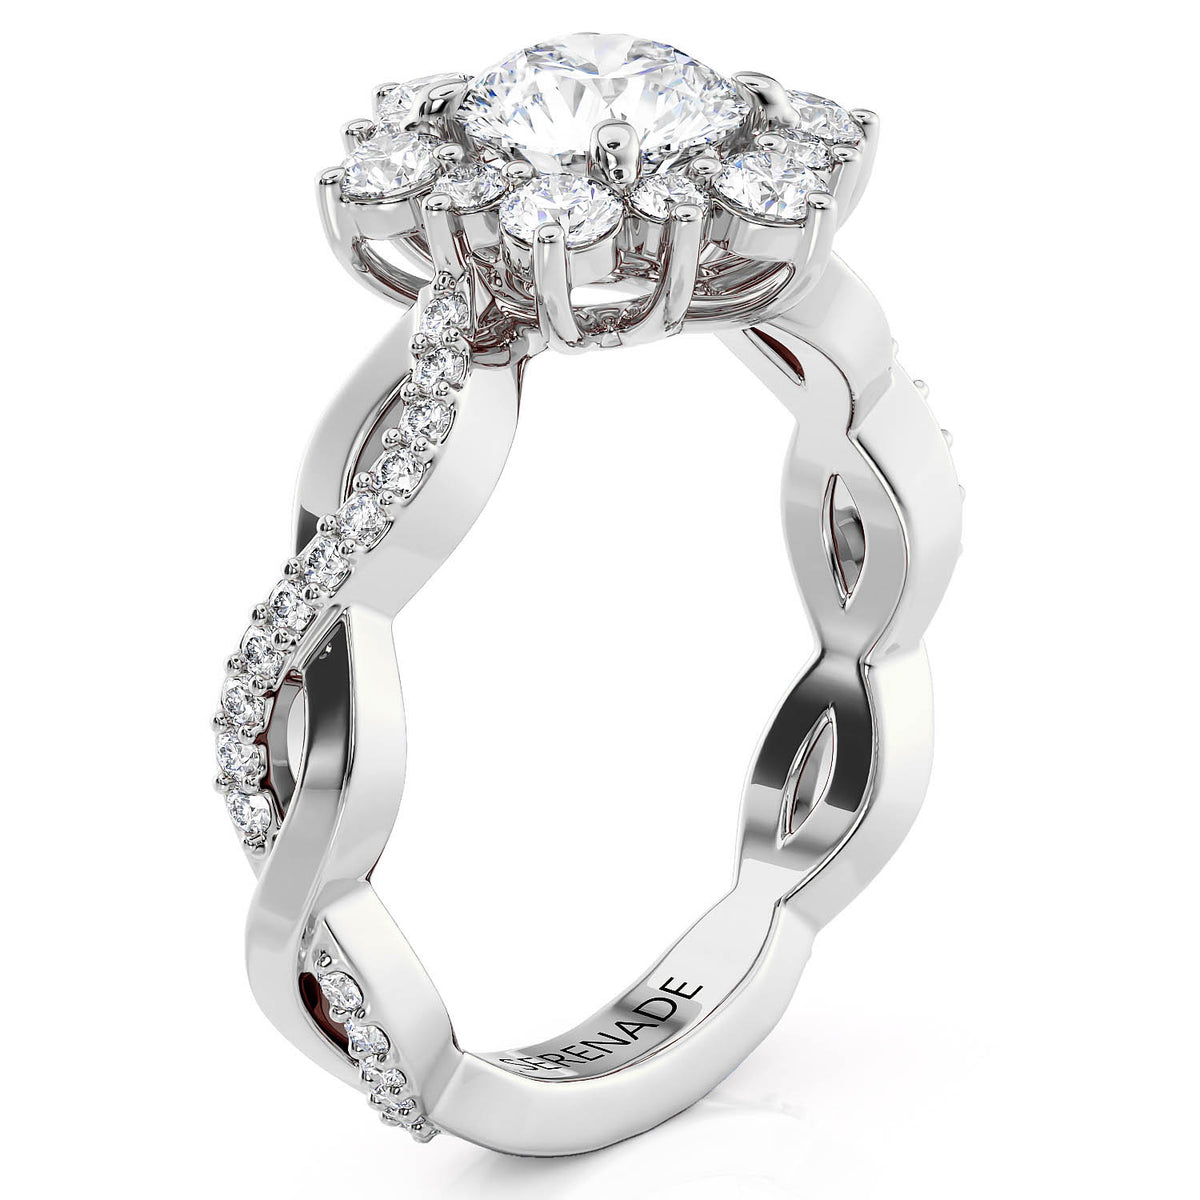 Twisted Band Snowflake Engagement Ring - Twisted Snowflake